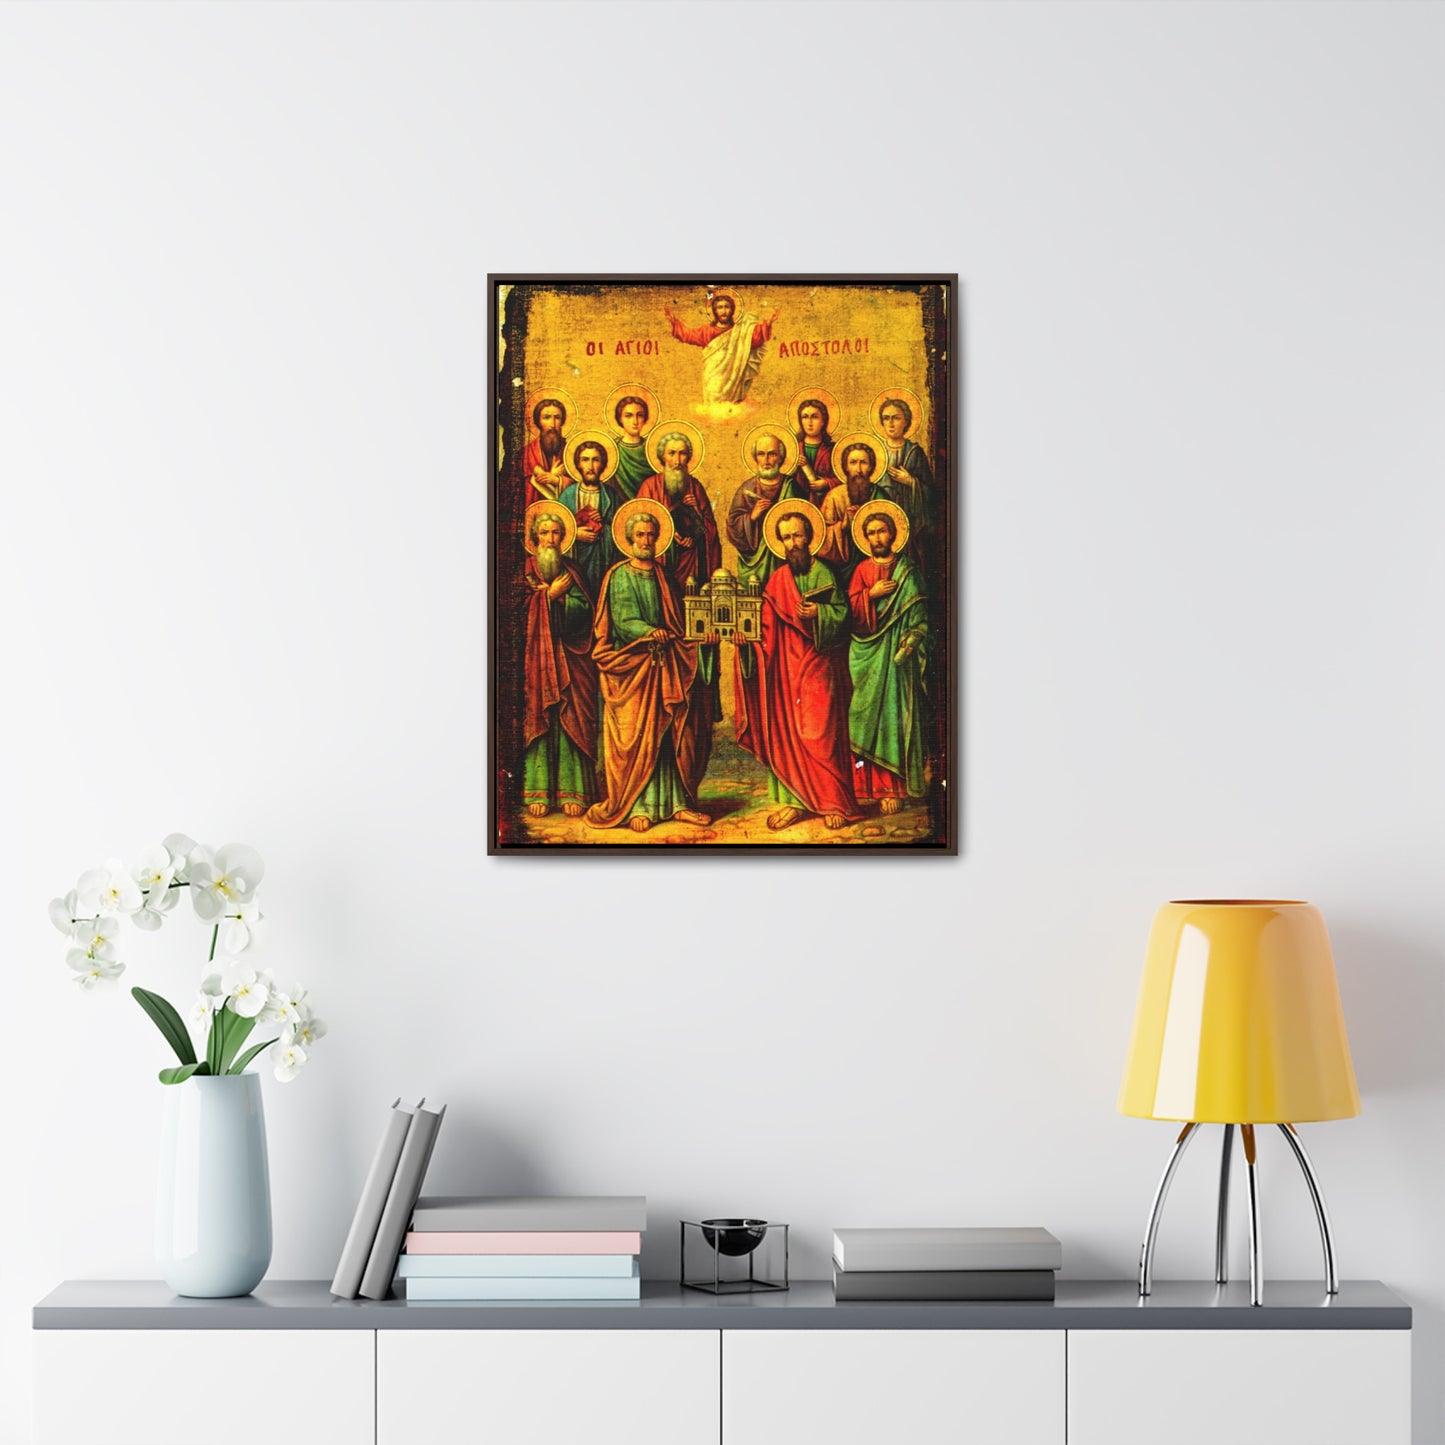 Synaxis of the Apostles Greek Icon - Framed Gallery Canvas Wrap - Sanctus Art Gallery